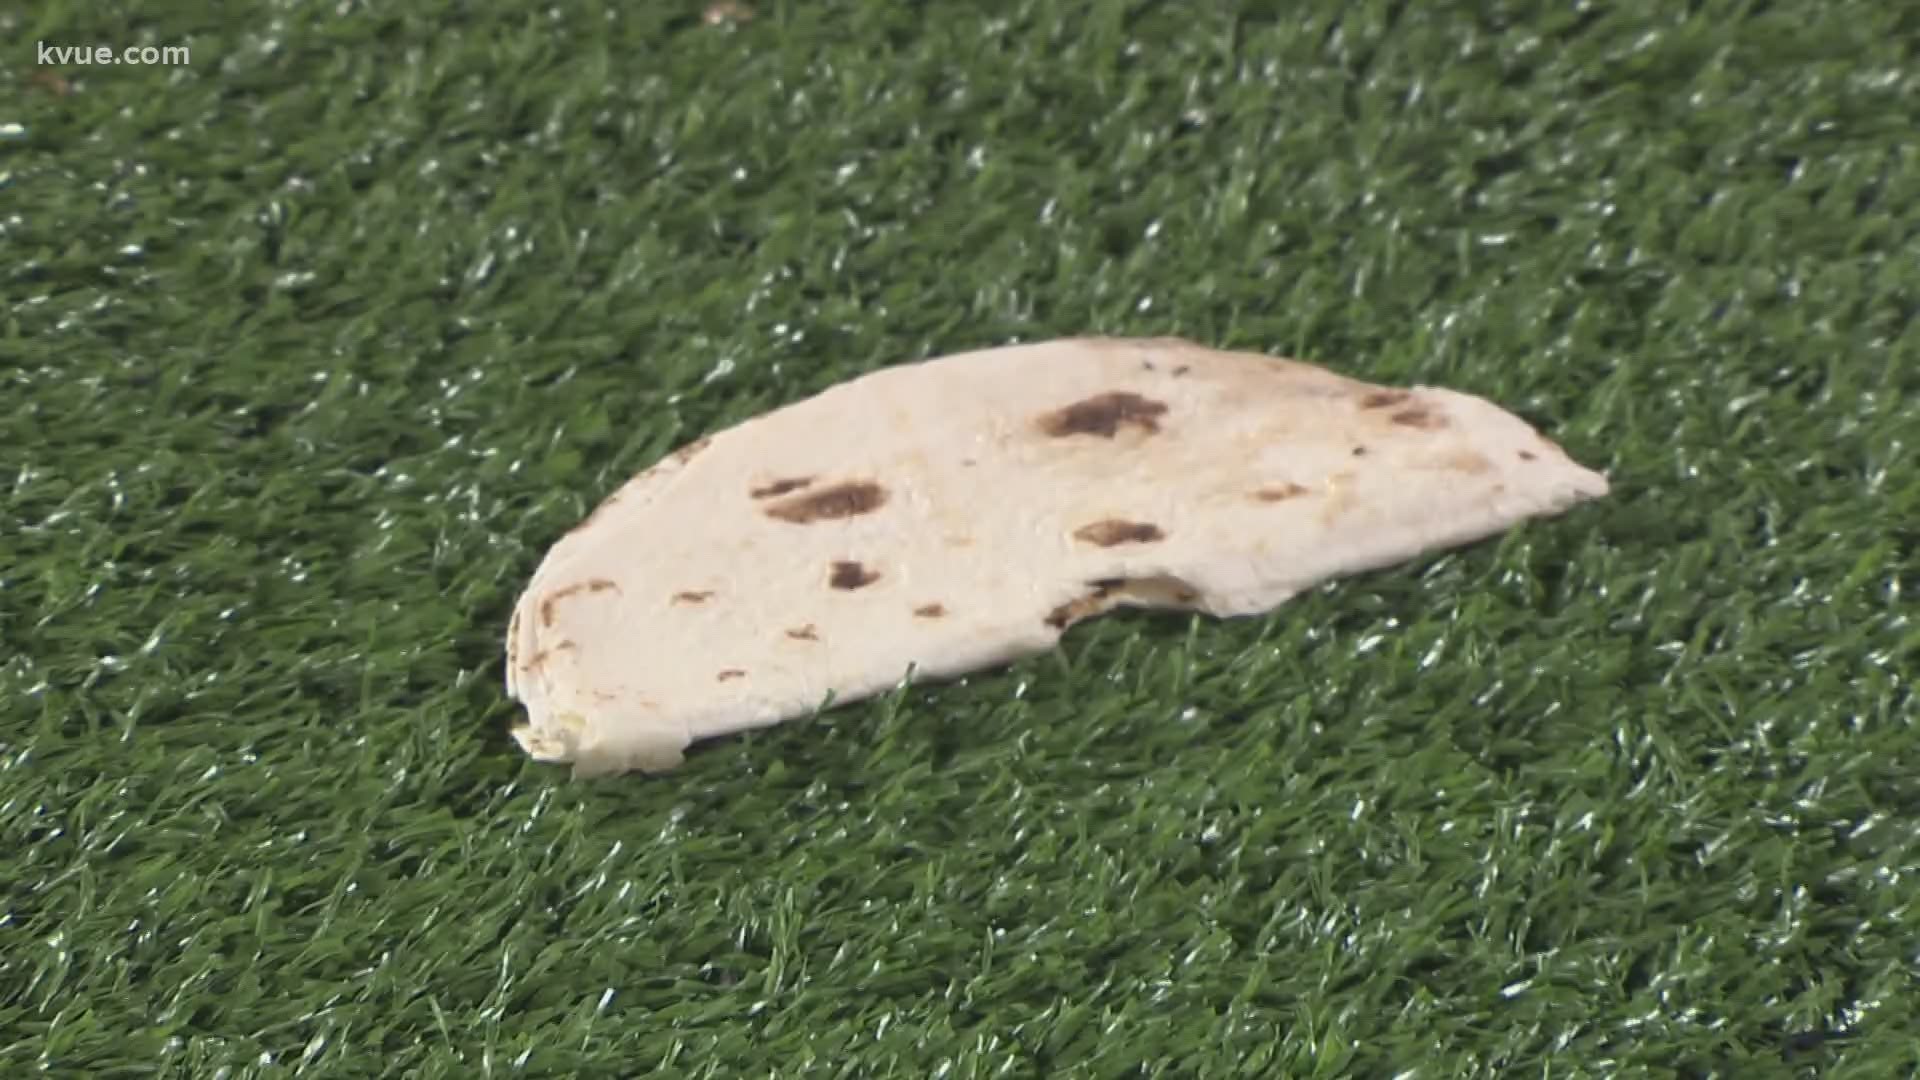 For years, Red Raider fans have tormented and confused opponents by throwing tortillas.